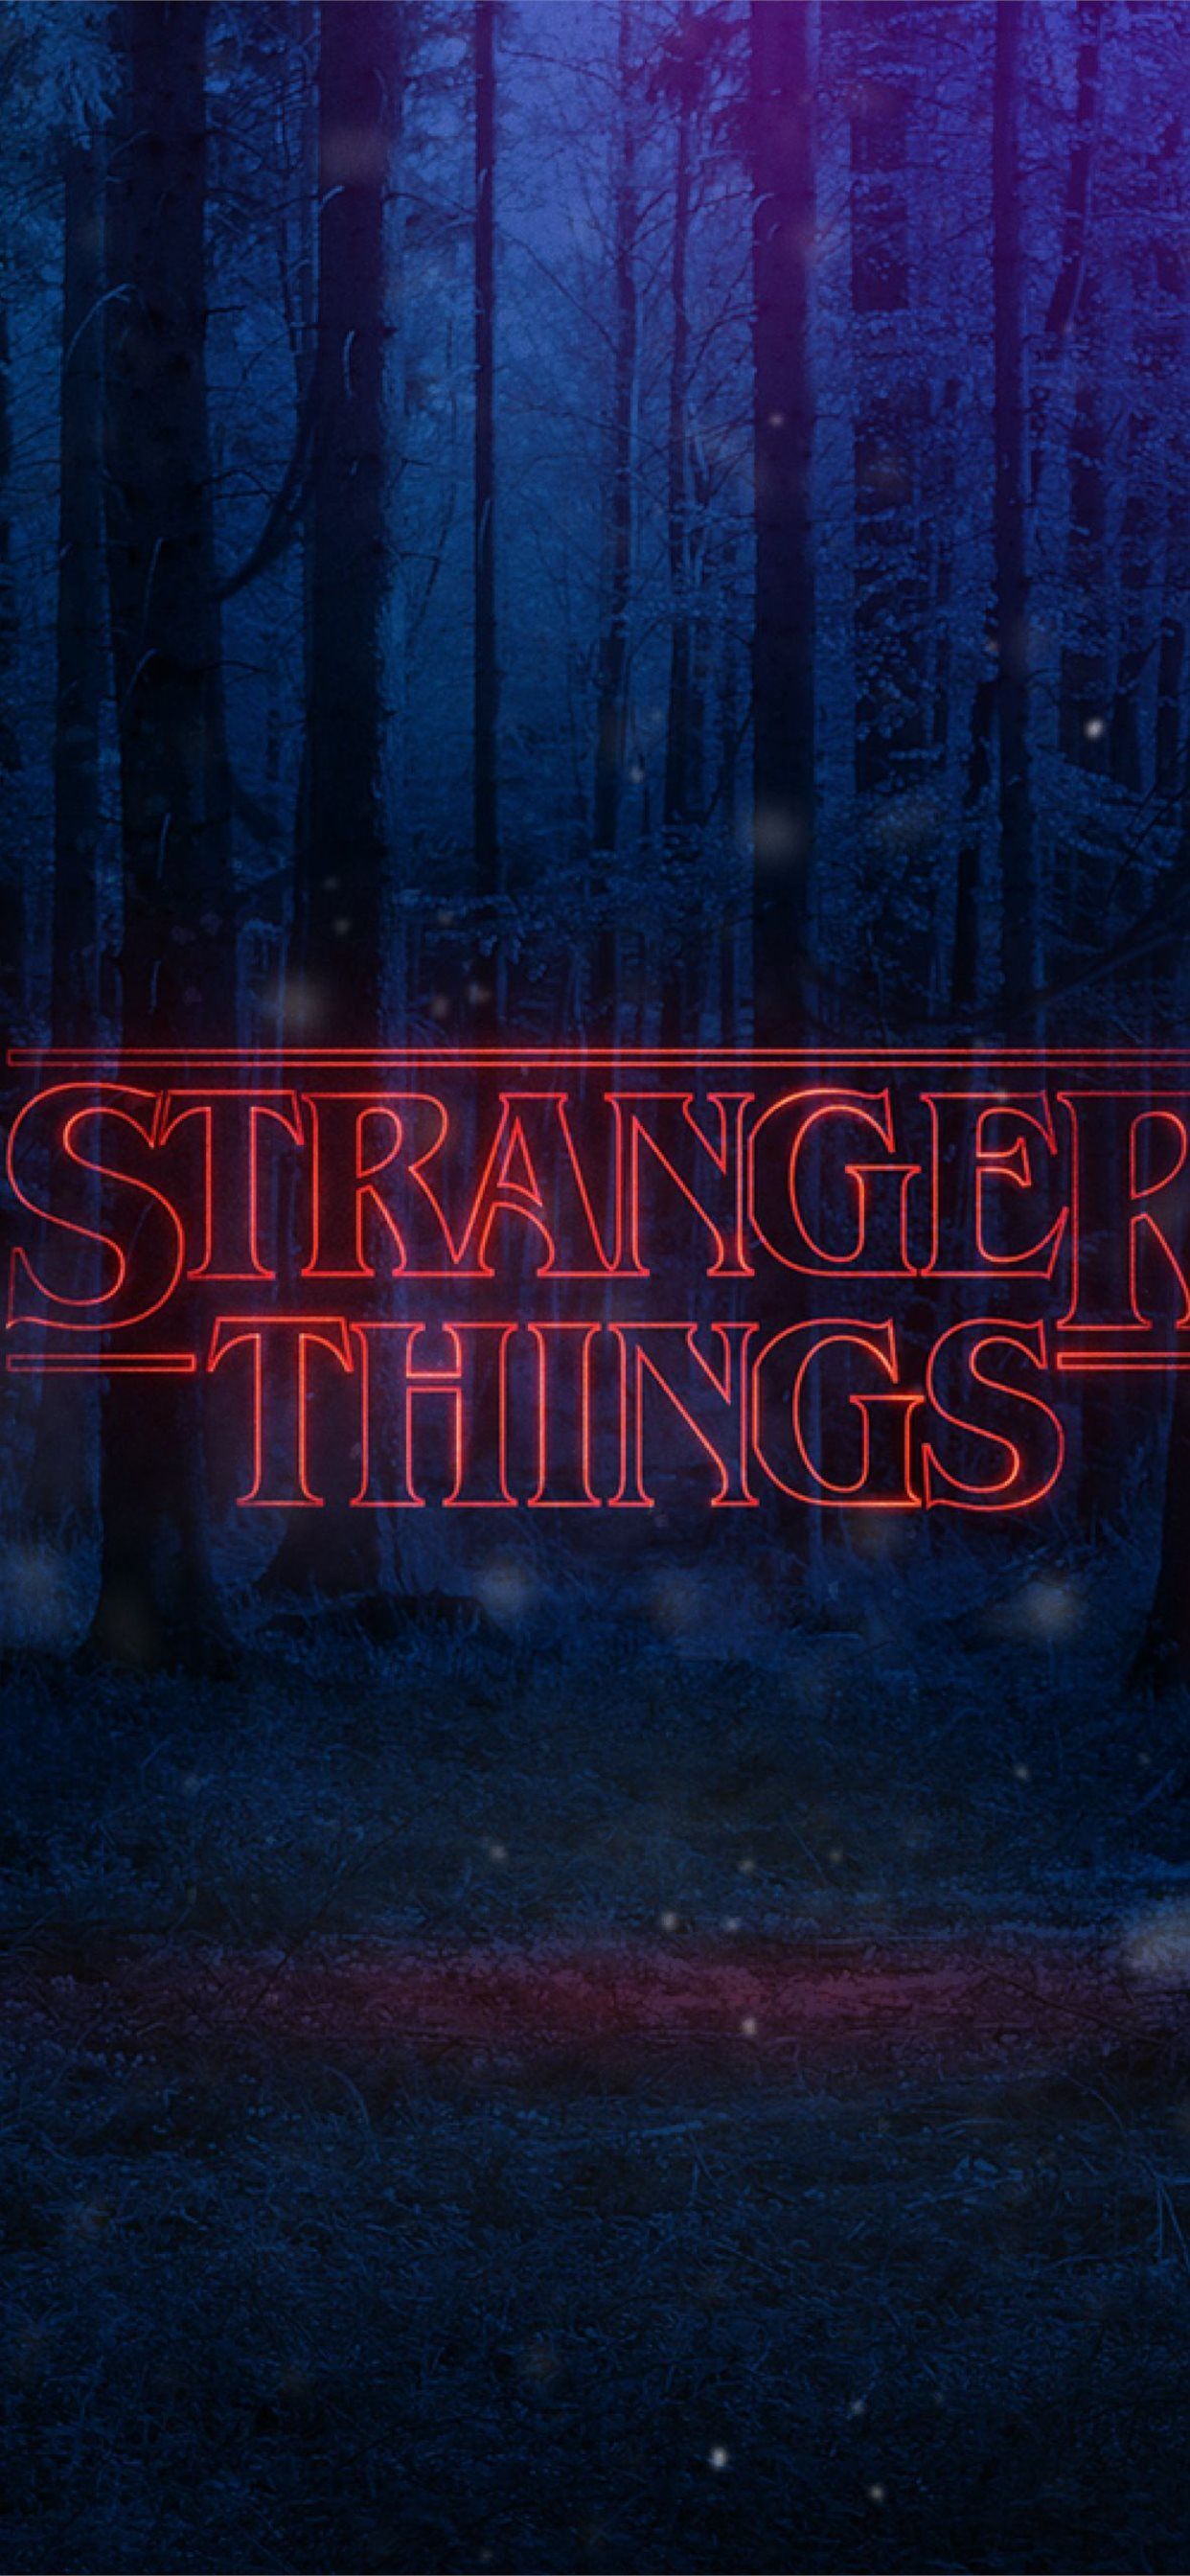 Stranger Things iPhone Wallpaper with high-resolution 1080x1920 pixel. You can use this wallpaper for your iPhone 5, 6, 7, 8, X, XS, XR backgrounds, Mobile Screensaver, or iPad Lock Screen - Stranger Things